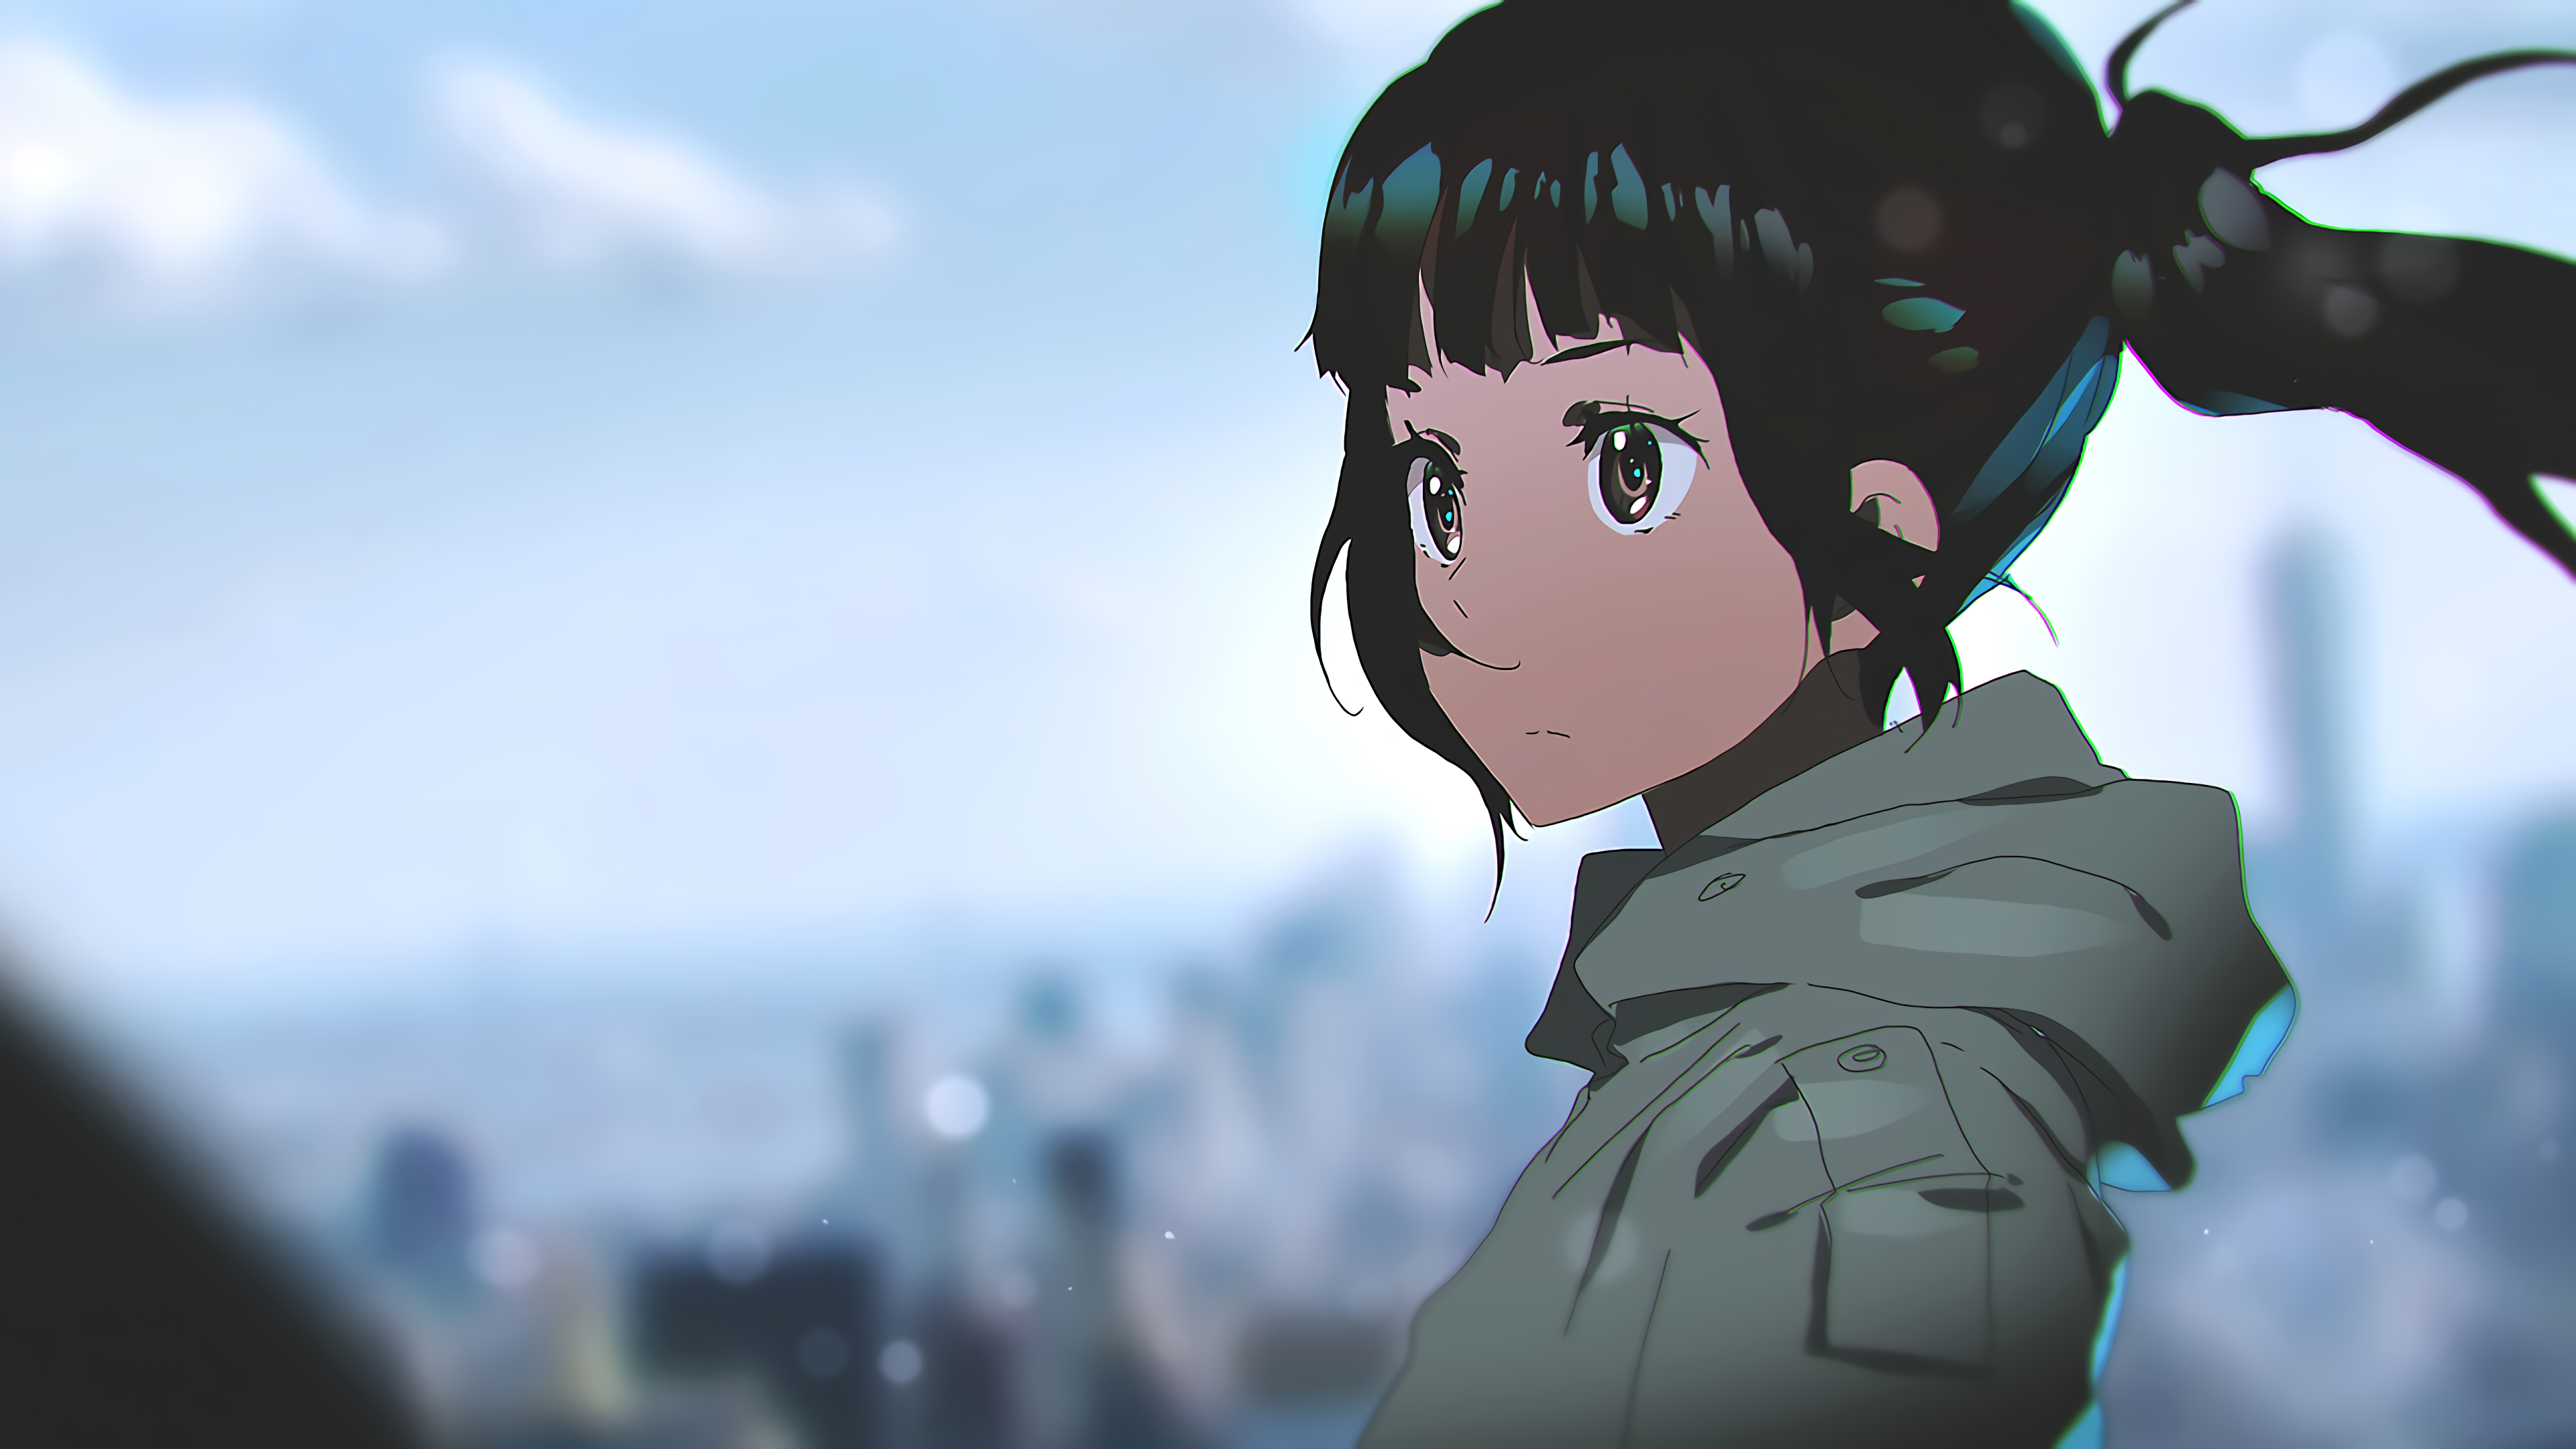 Tom Skender Anime Girls Anime DeviantArt Face Looking Away Blurred Blurry Background Ponytail Clouds 3840x2160